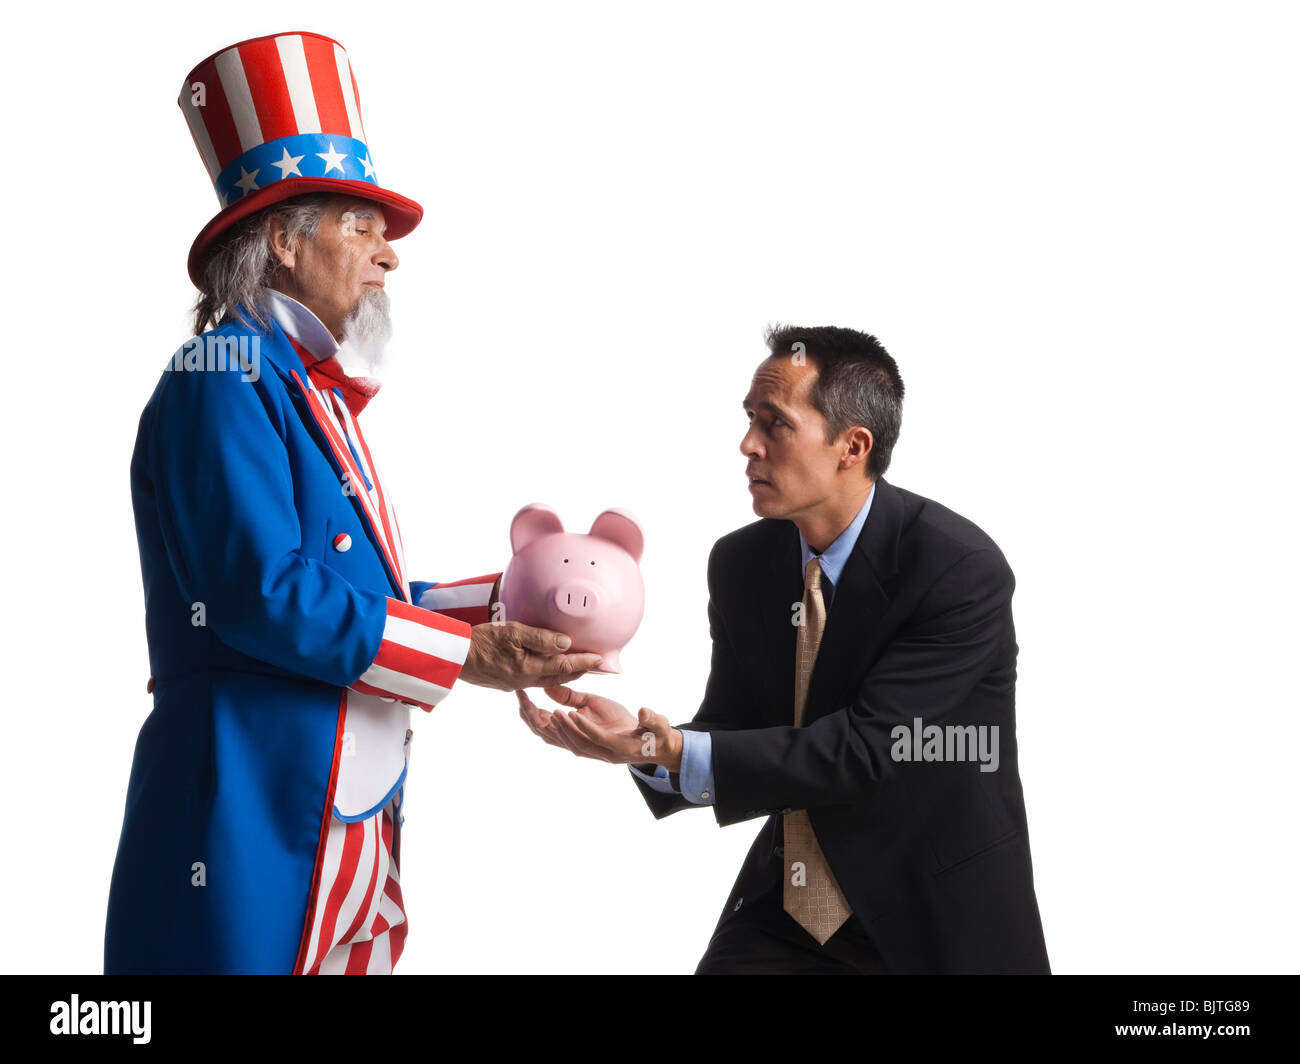 Man in Uncle Sam's costume giving piggybank to other man, studio shot Stock Photo